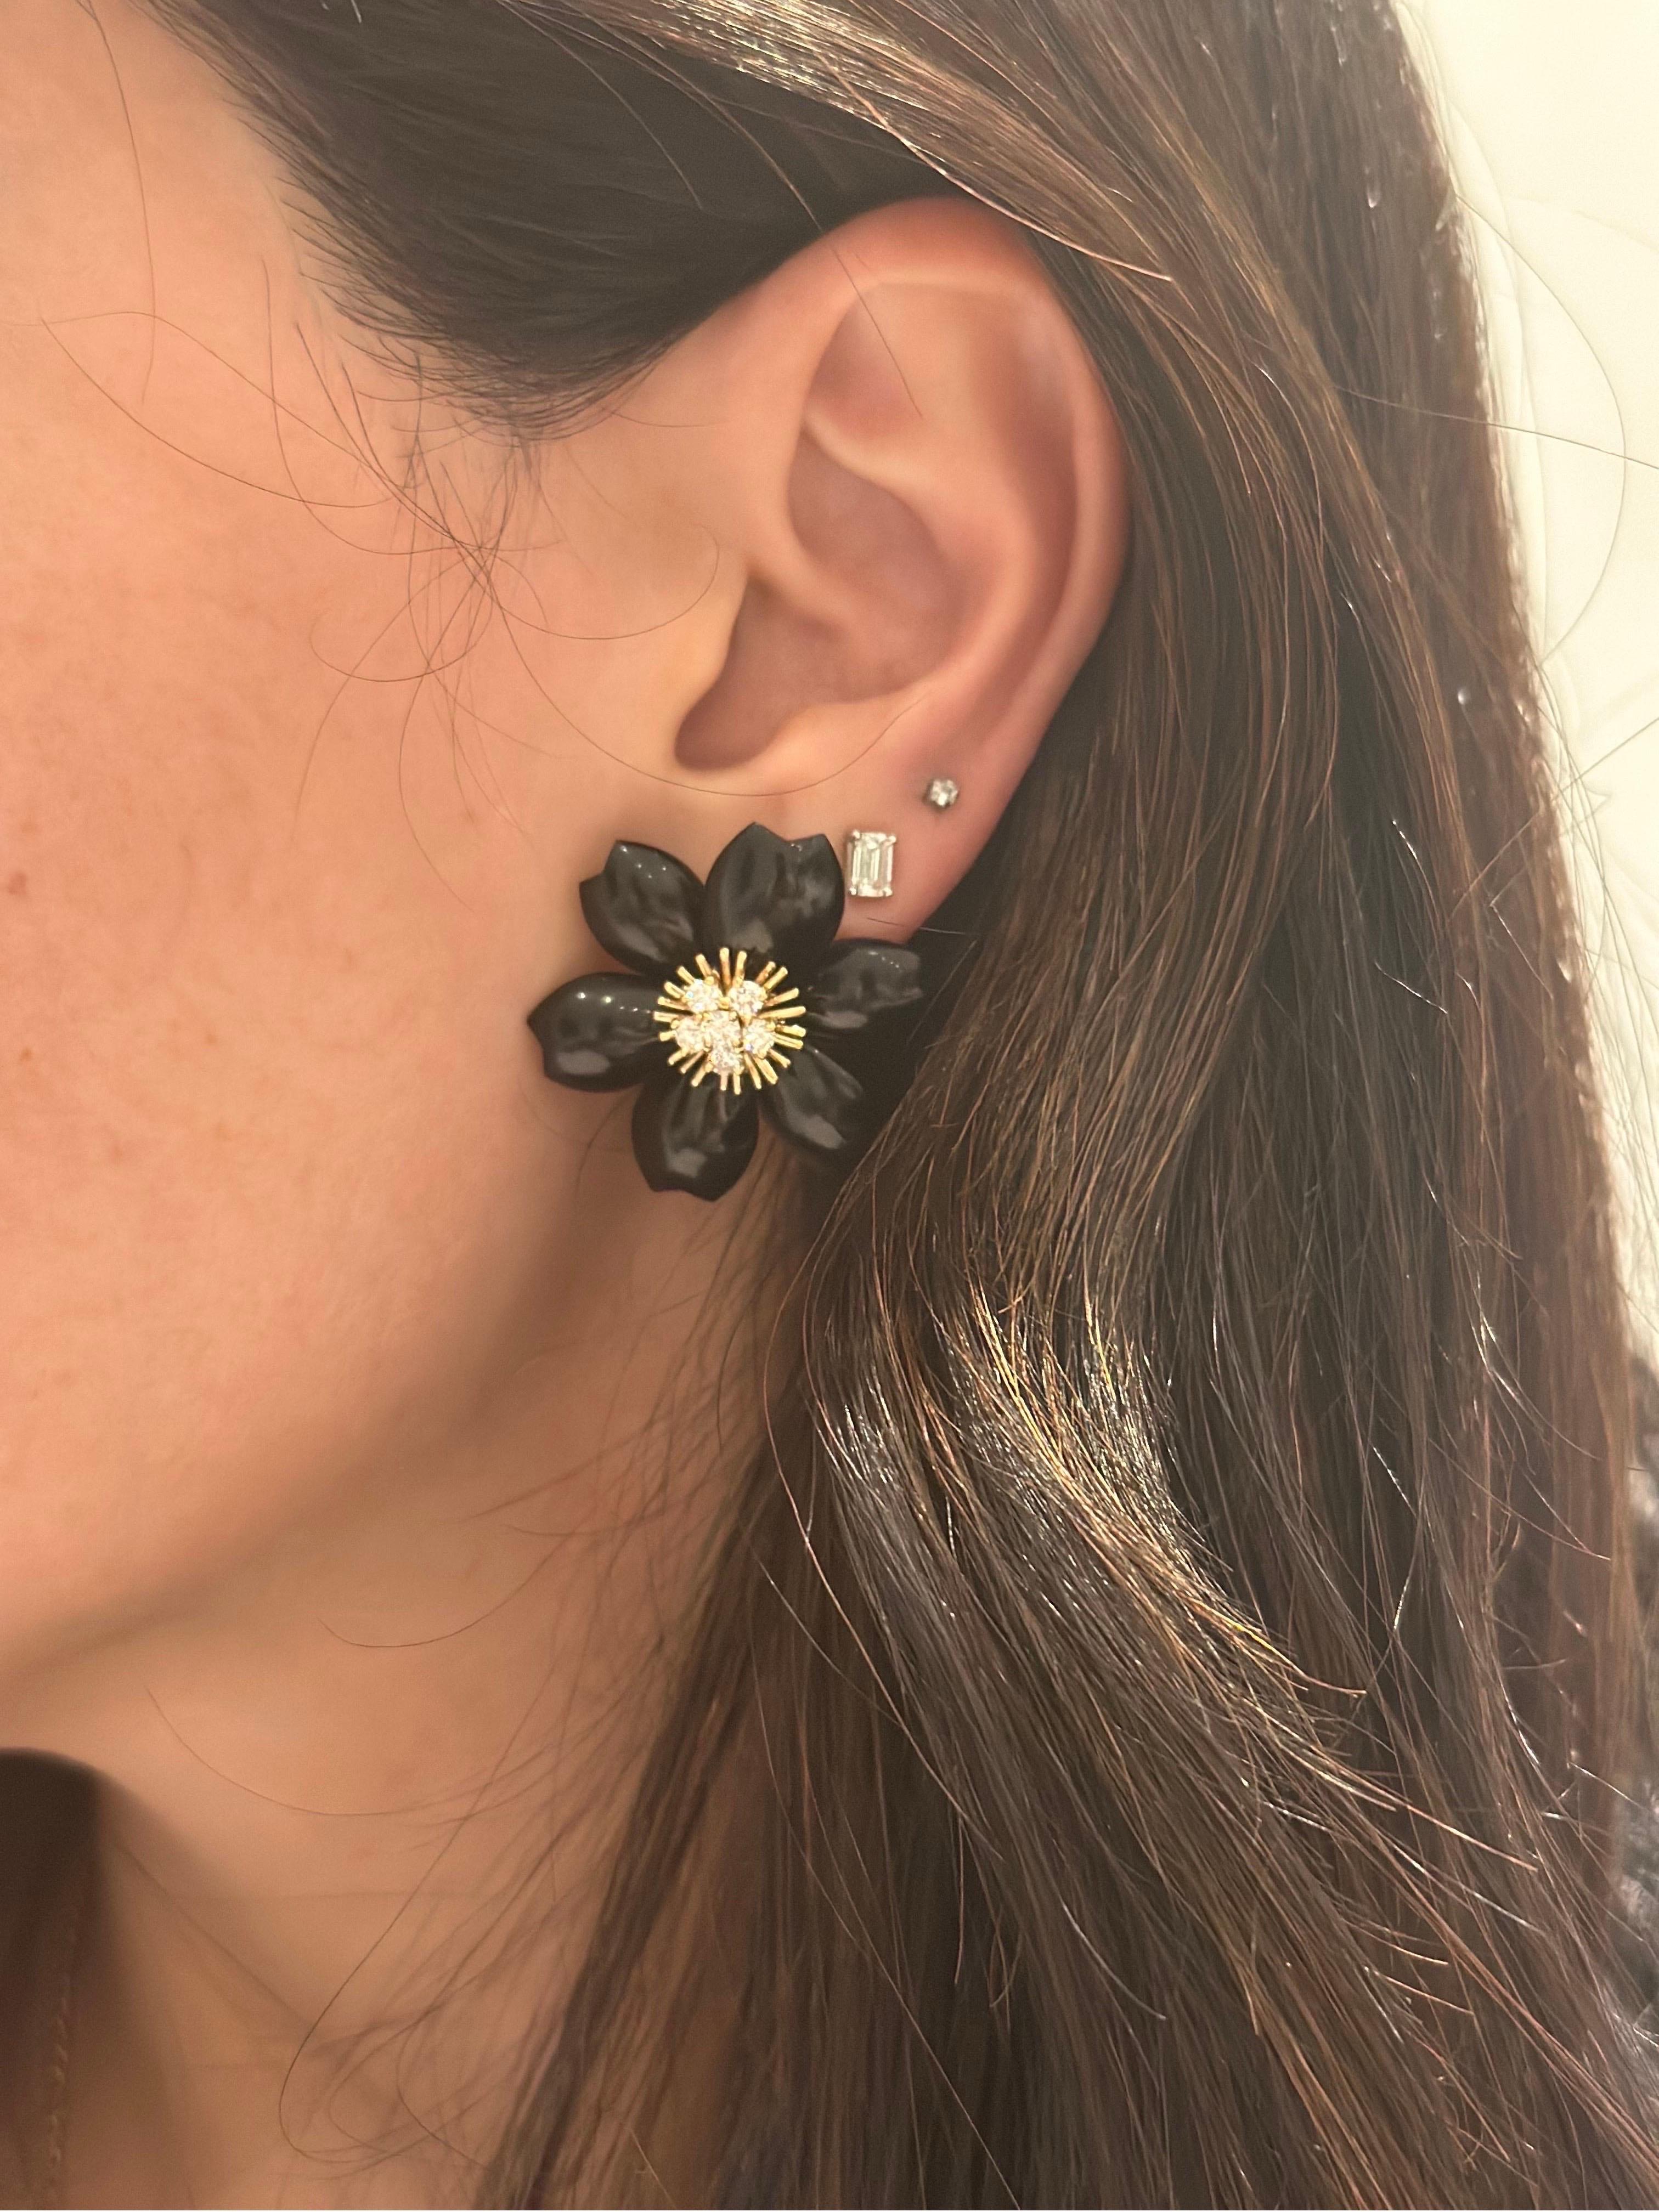 Van Cleef & Arpels Pair of Gold, Onyx and Diamond 'Rose de Noel' Ear-clips, France, crafted in 18k yellow gold, each flower consists of six onyx petals, centered with a floret of 6 round brilliant cut diamonds. 12 Diamonds, total weight ap. 1.05 ct.